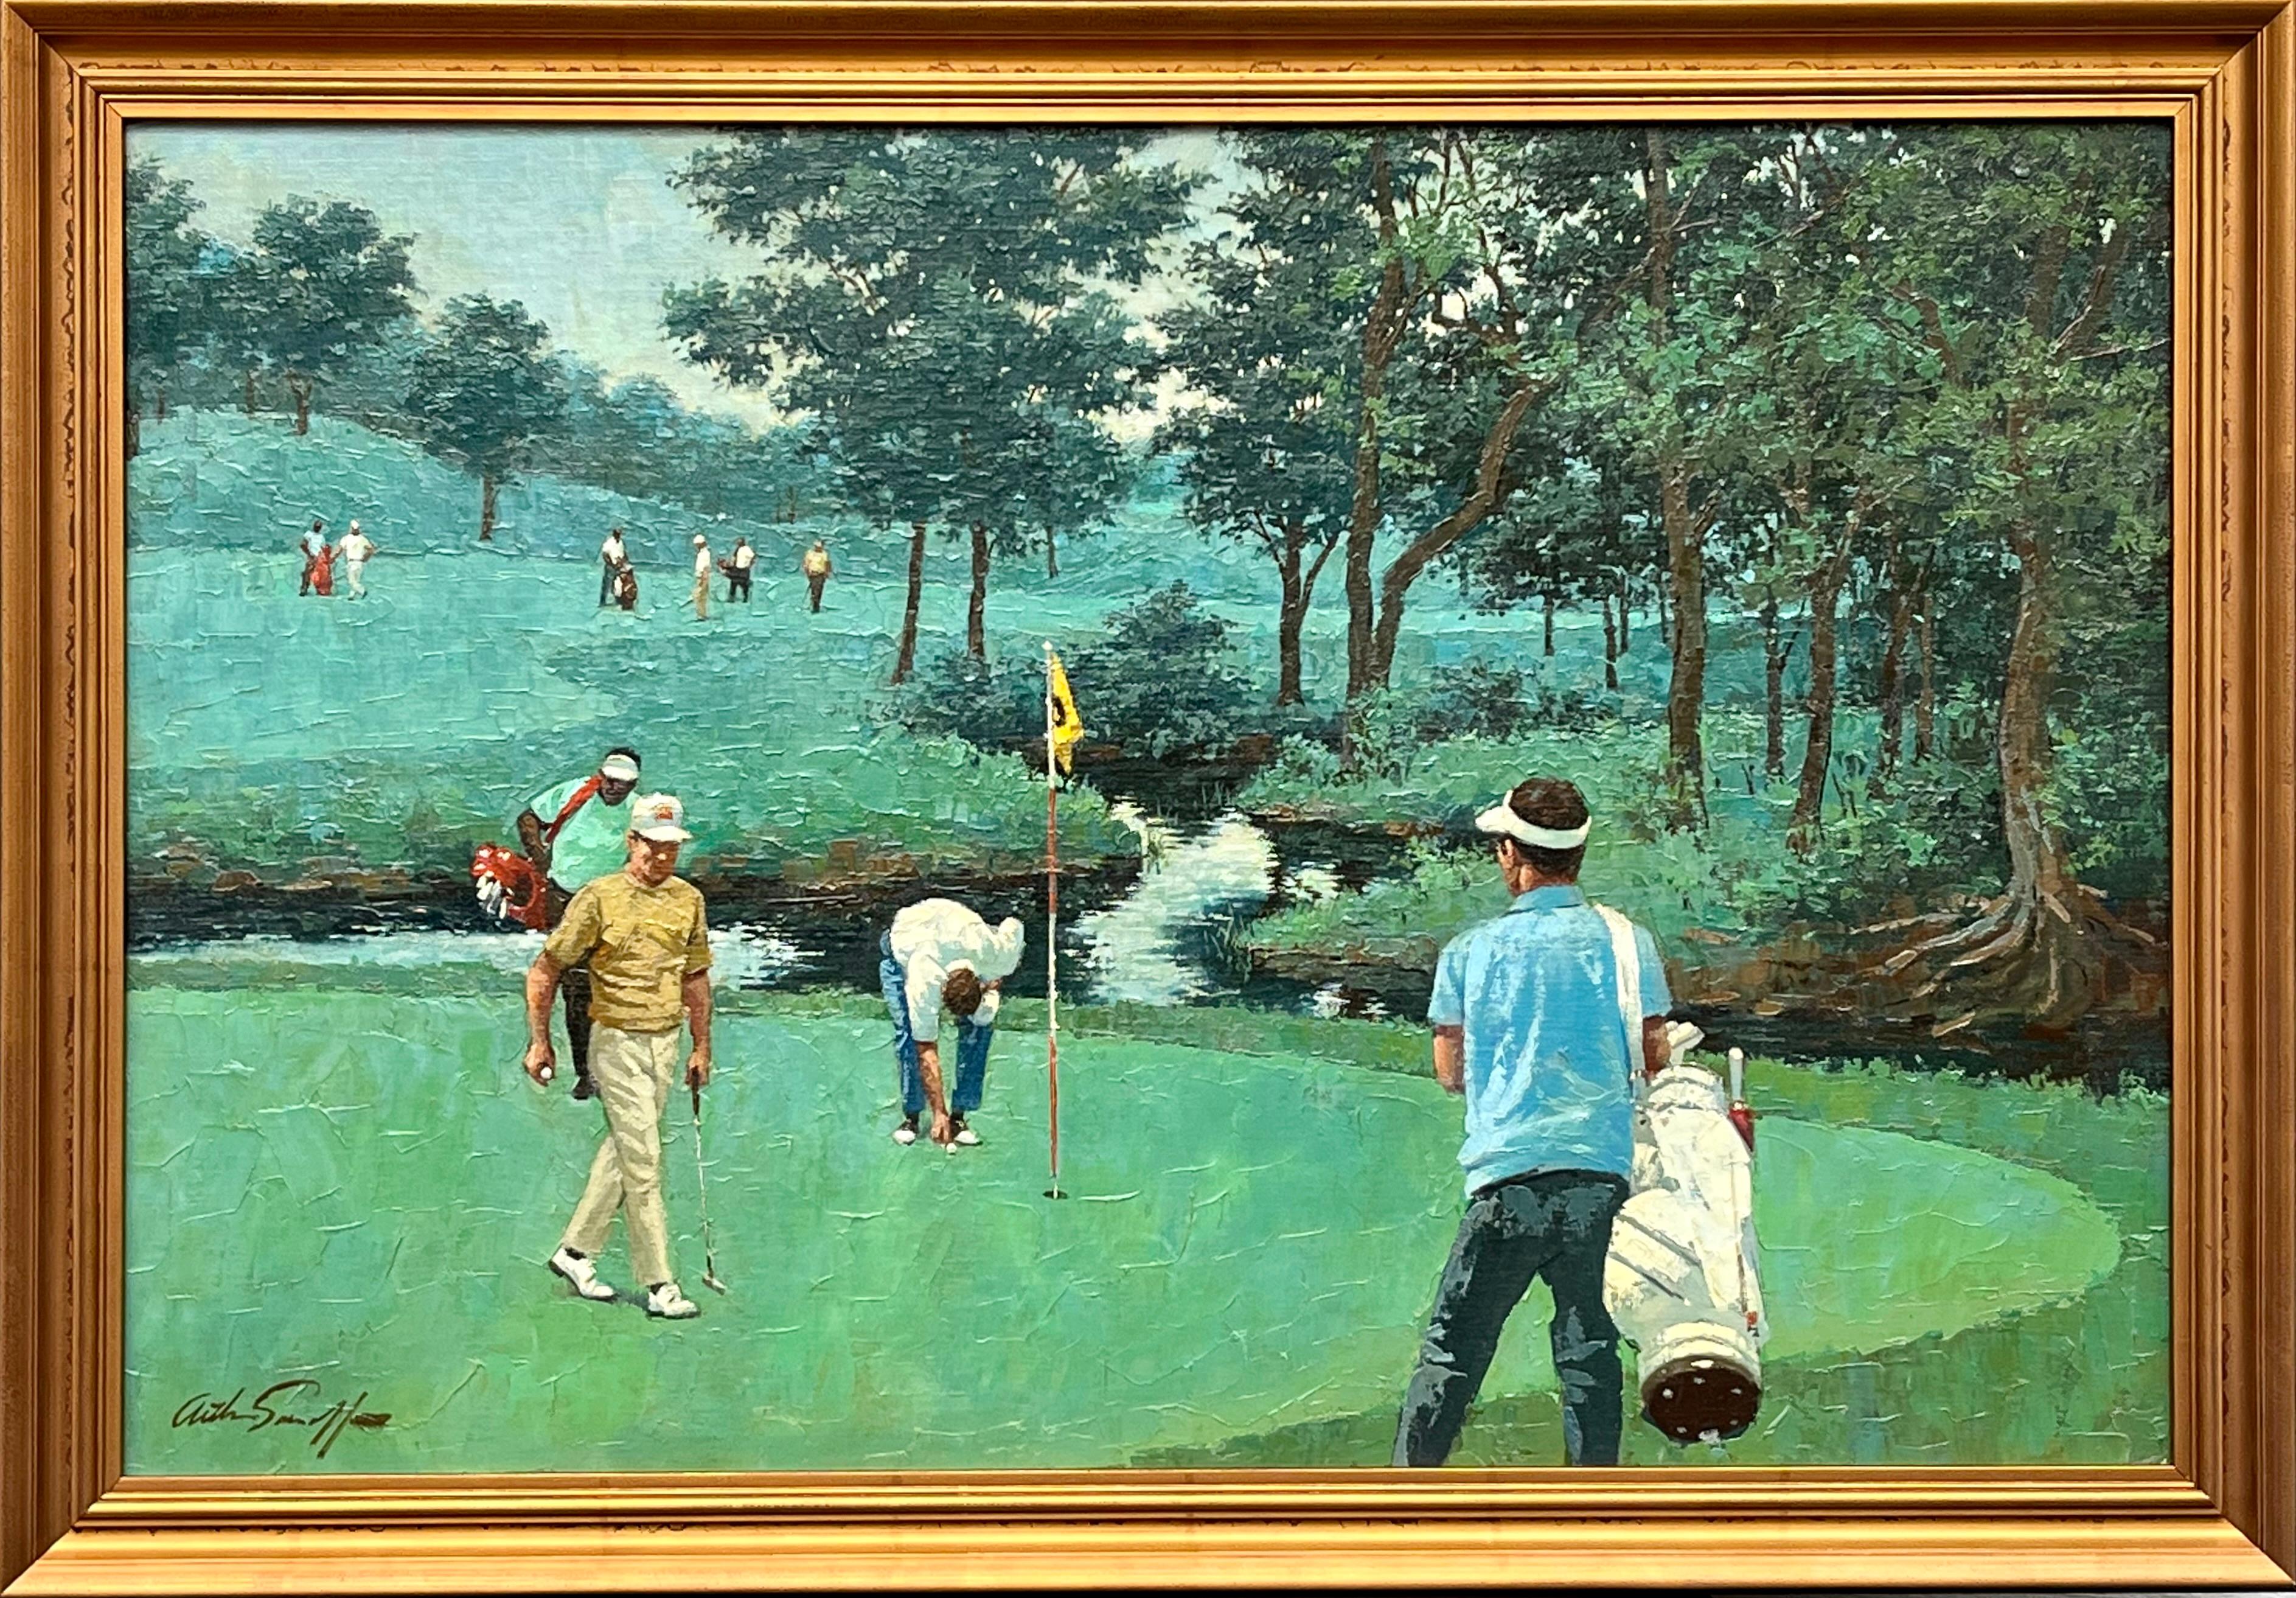 Golf Outing - Painting by Arthur Sarnoff